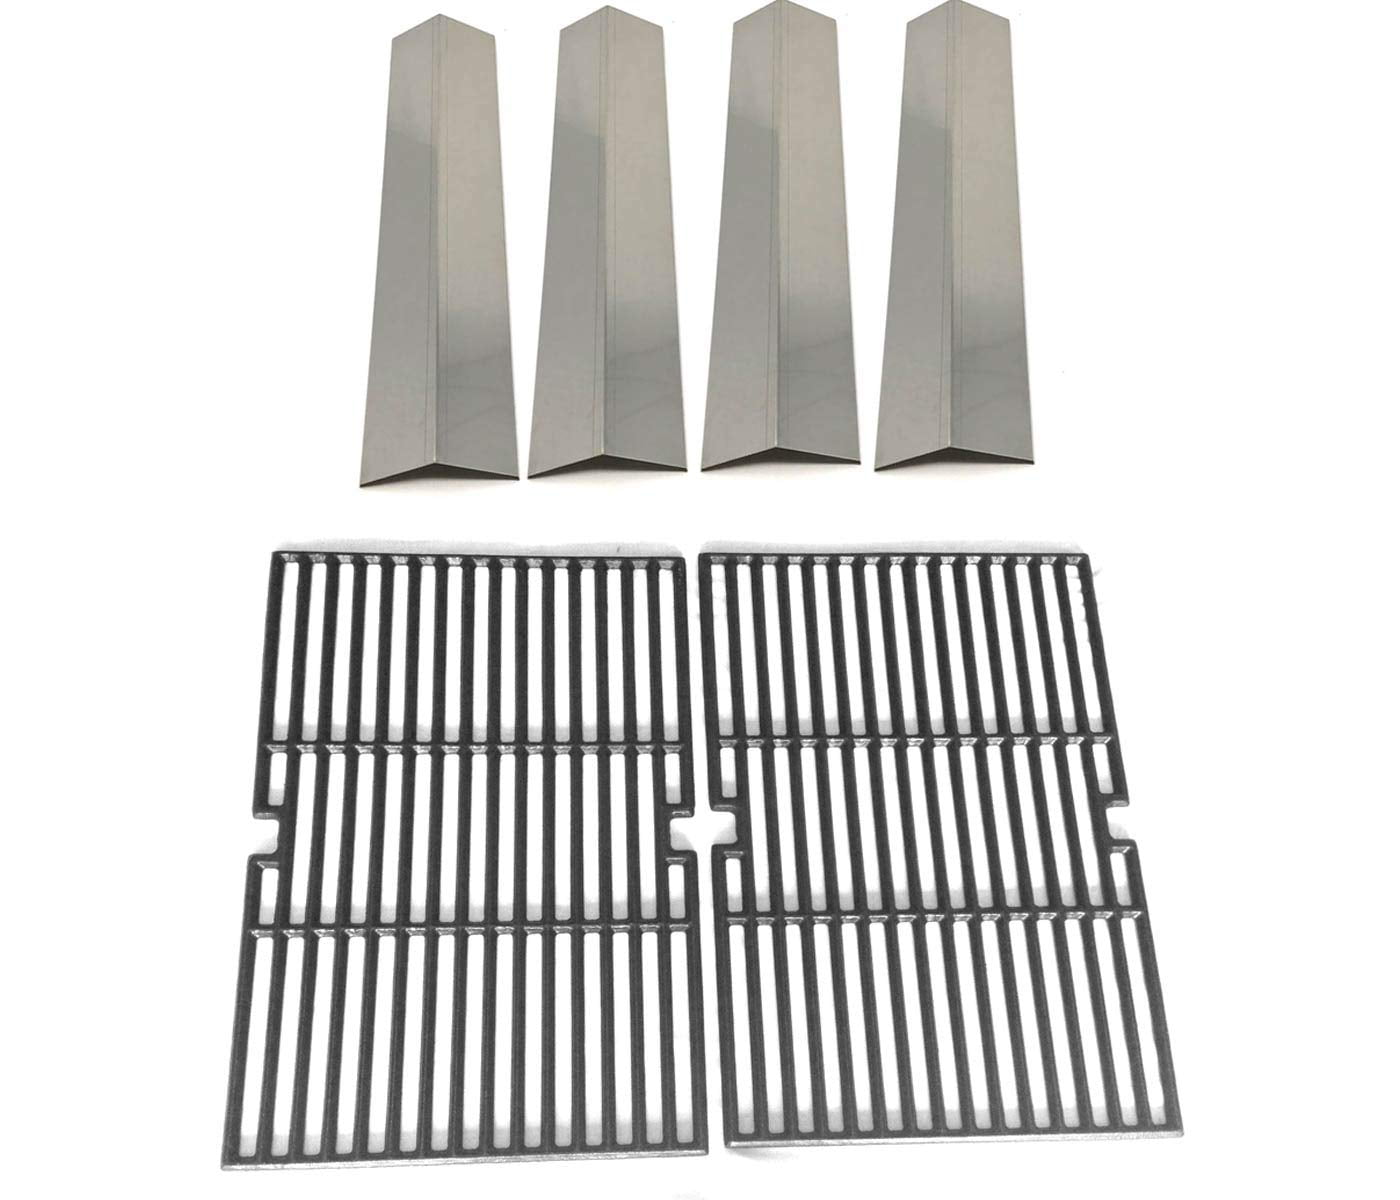 Universal Gas Barbecue Grill Replacement Porcelain cast iron Cooking Grid JGX233 